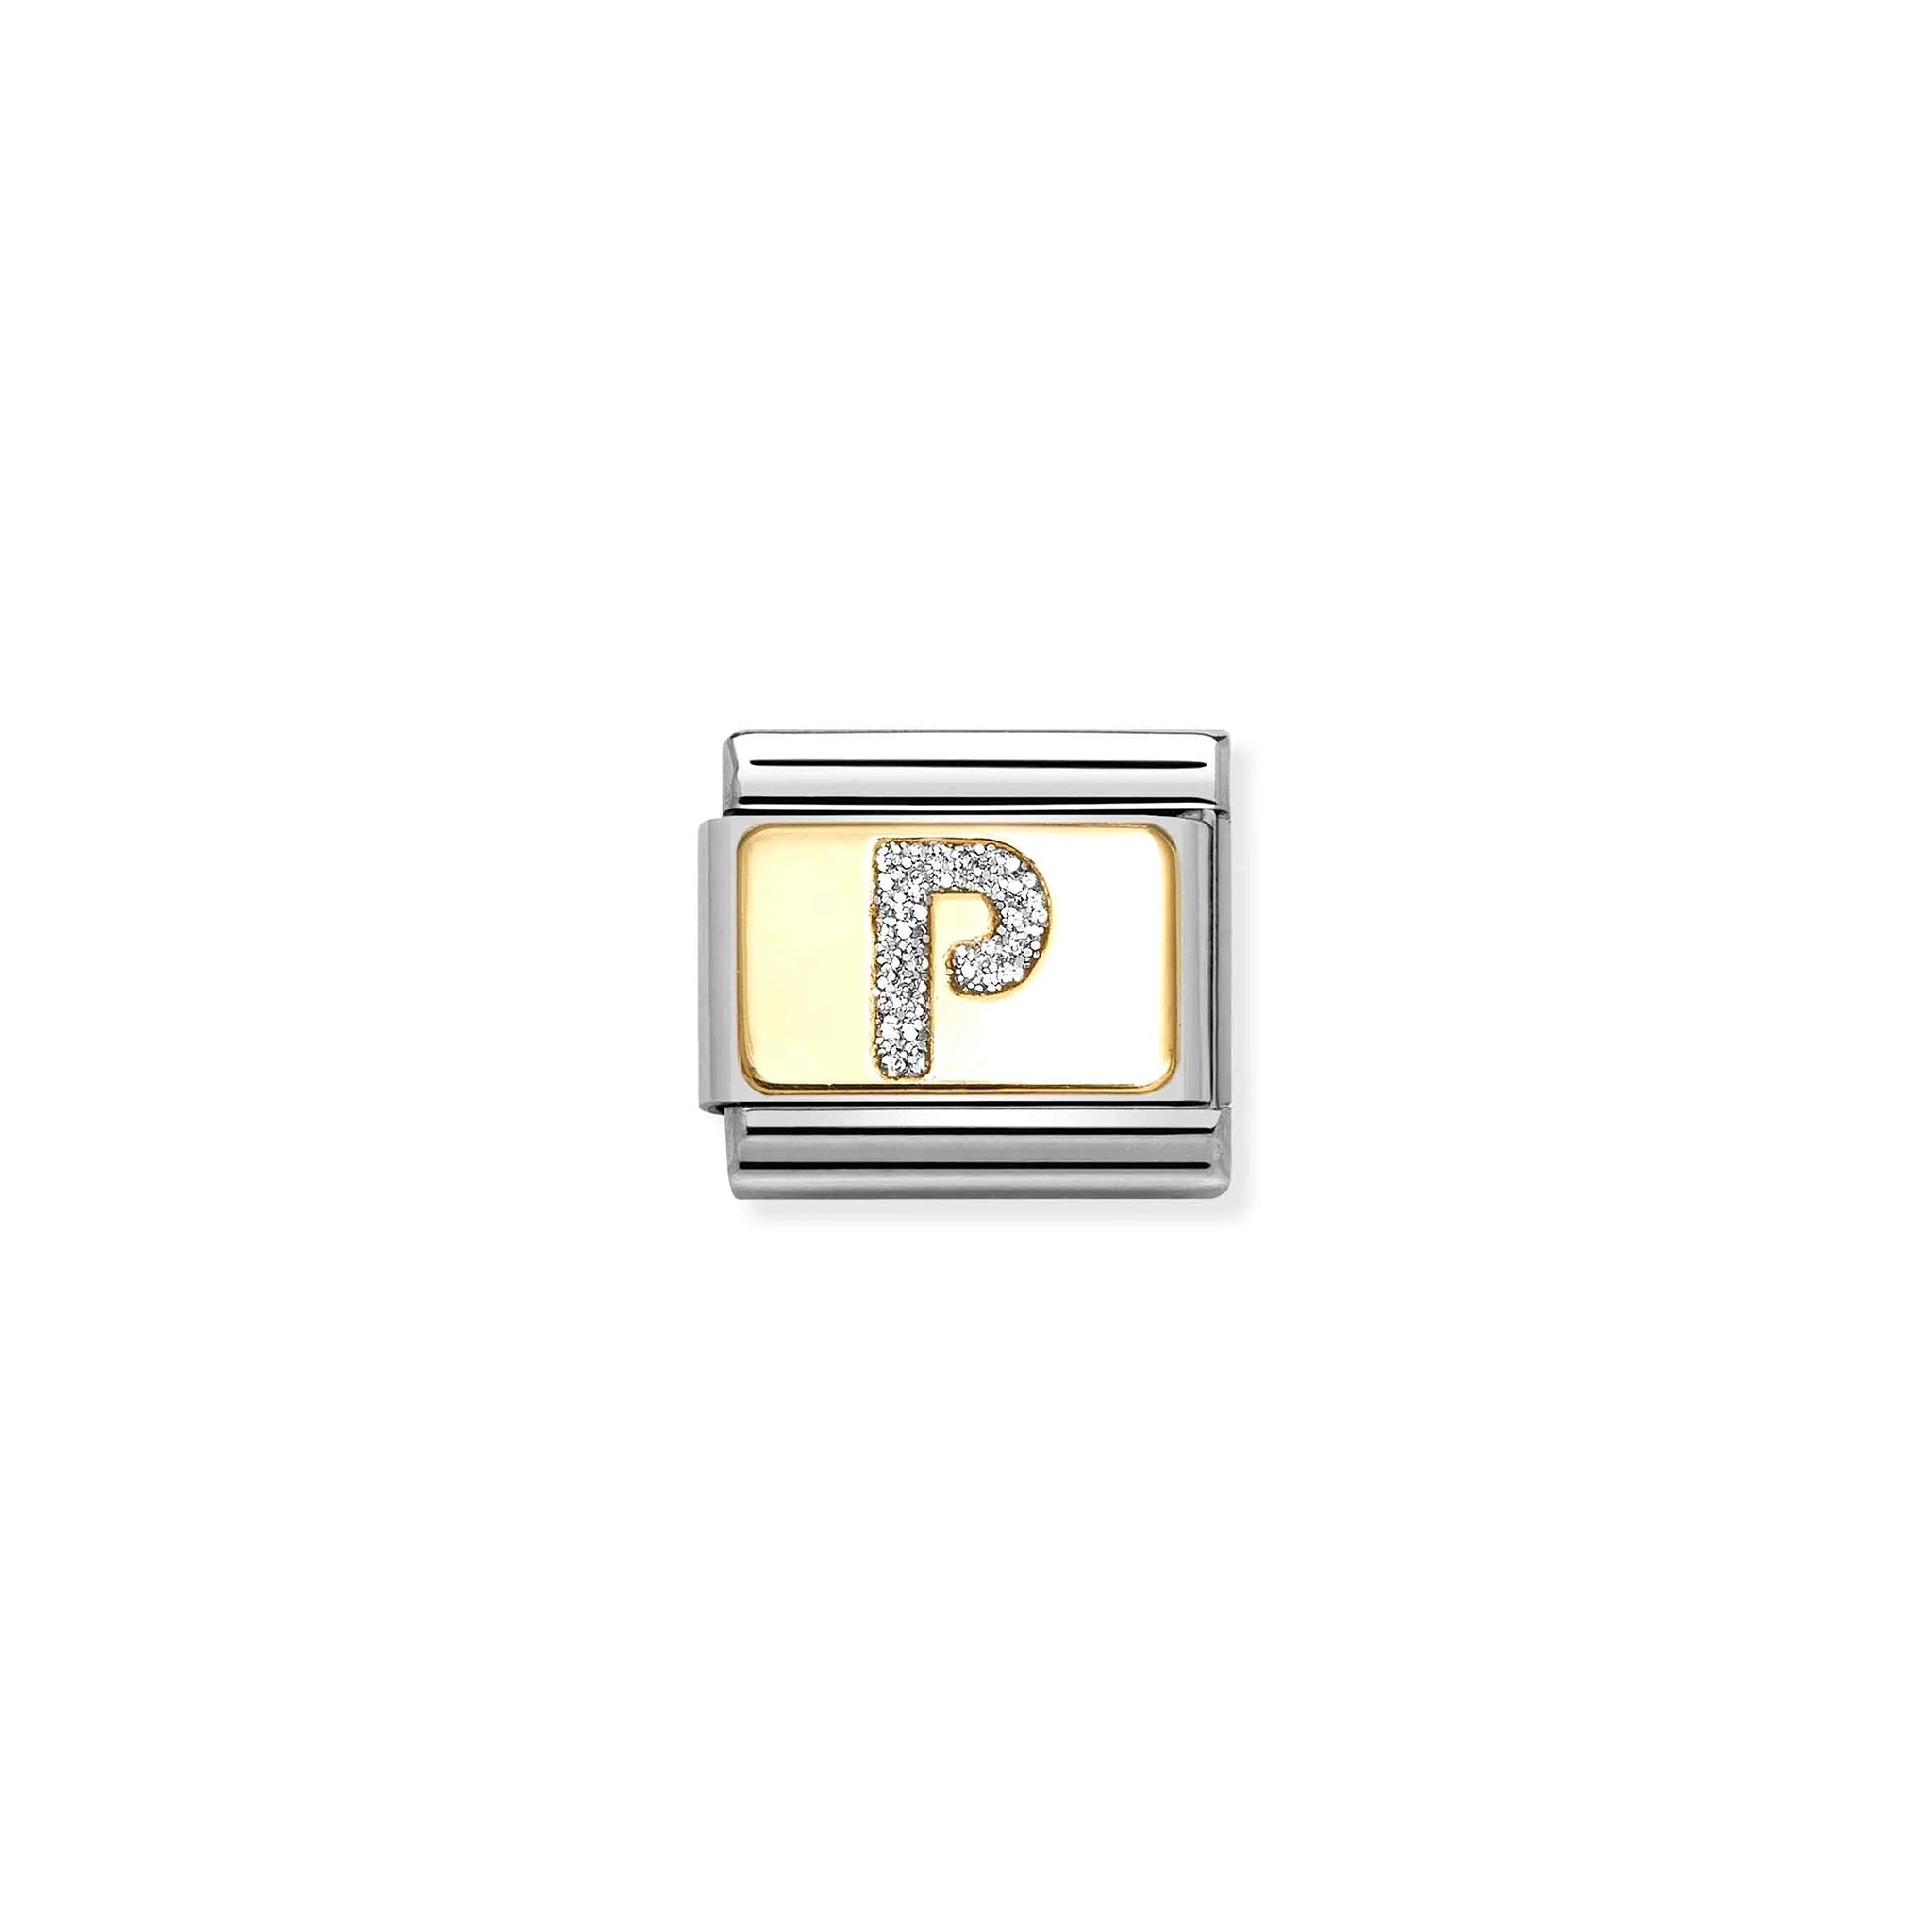 Nomination charm link featuring a gold plaque with a silver glitter letter P